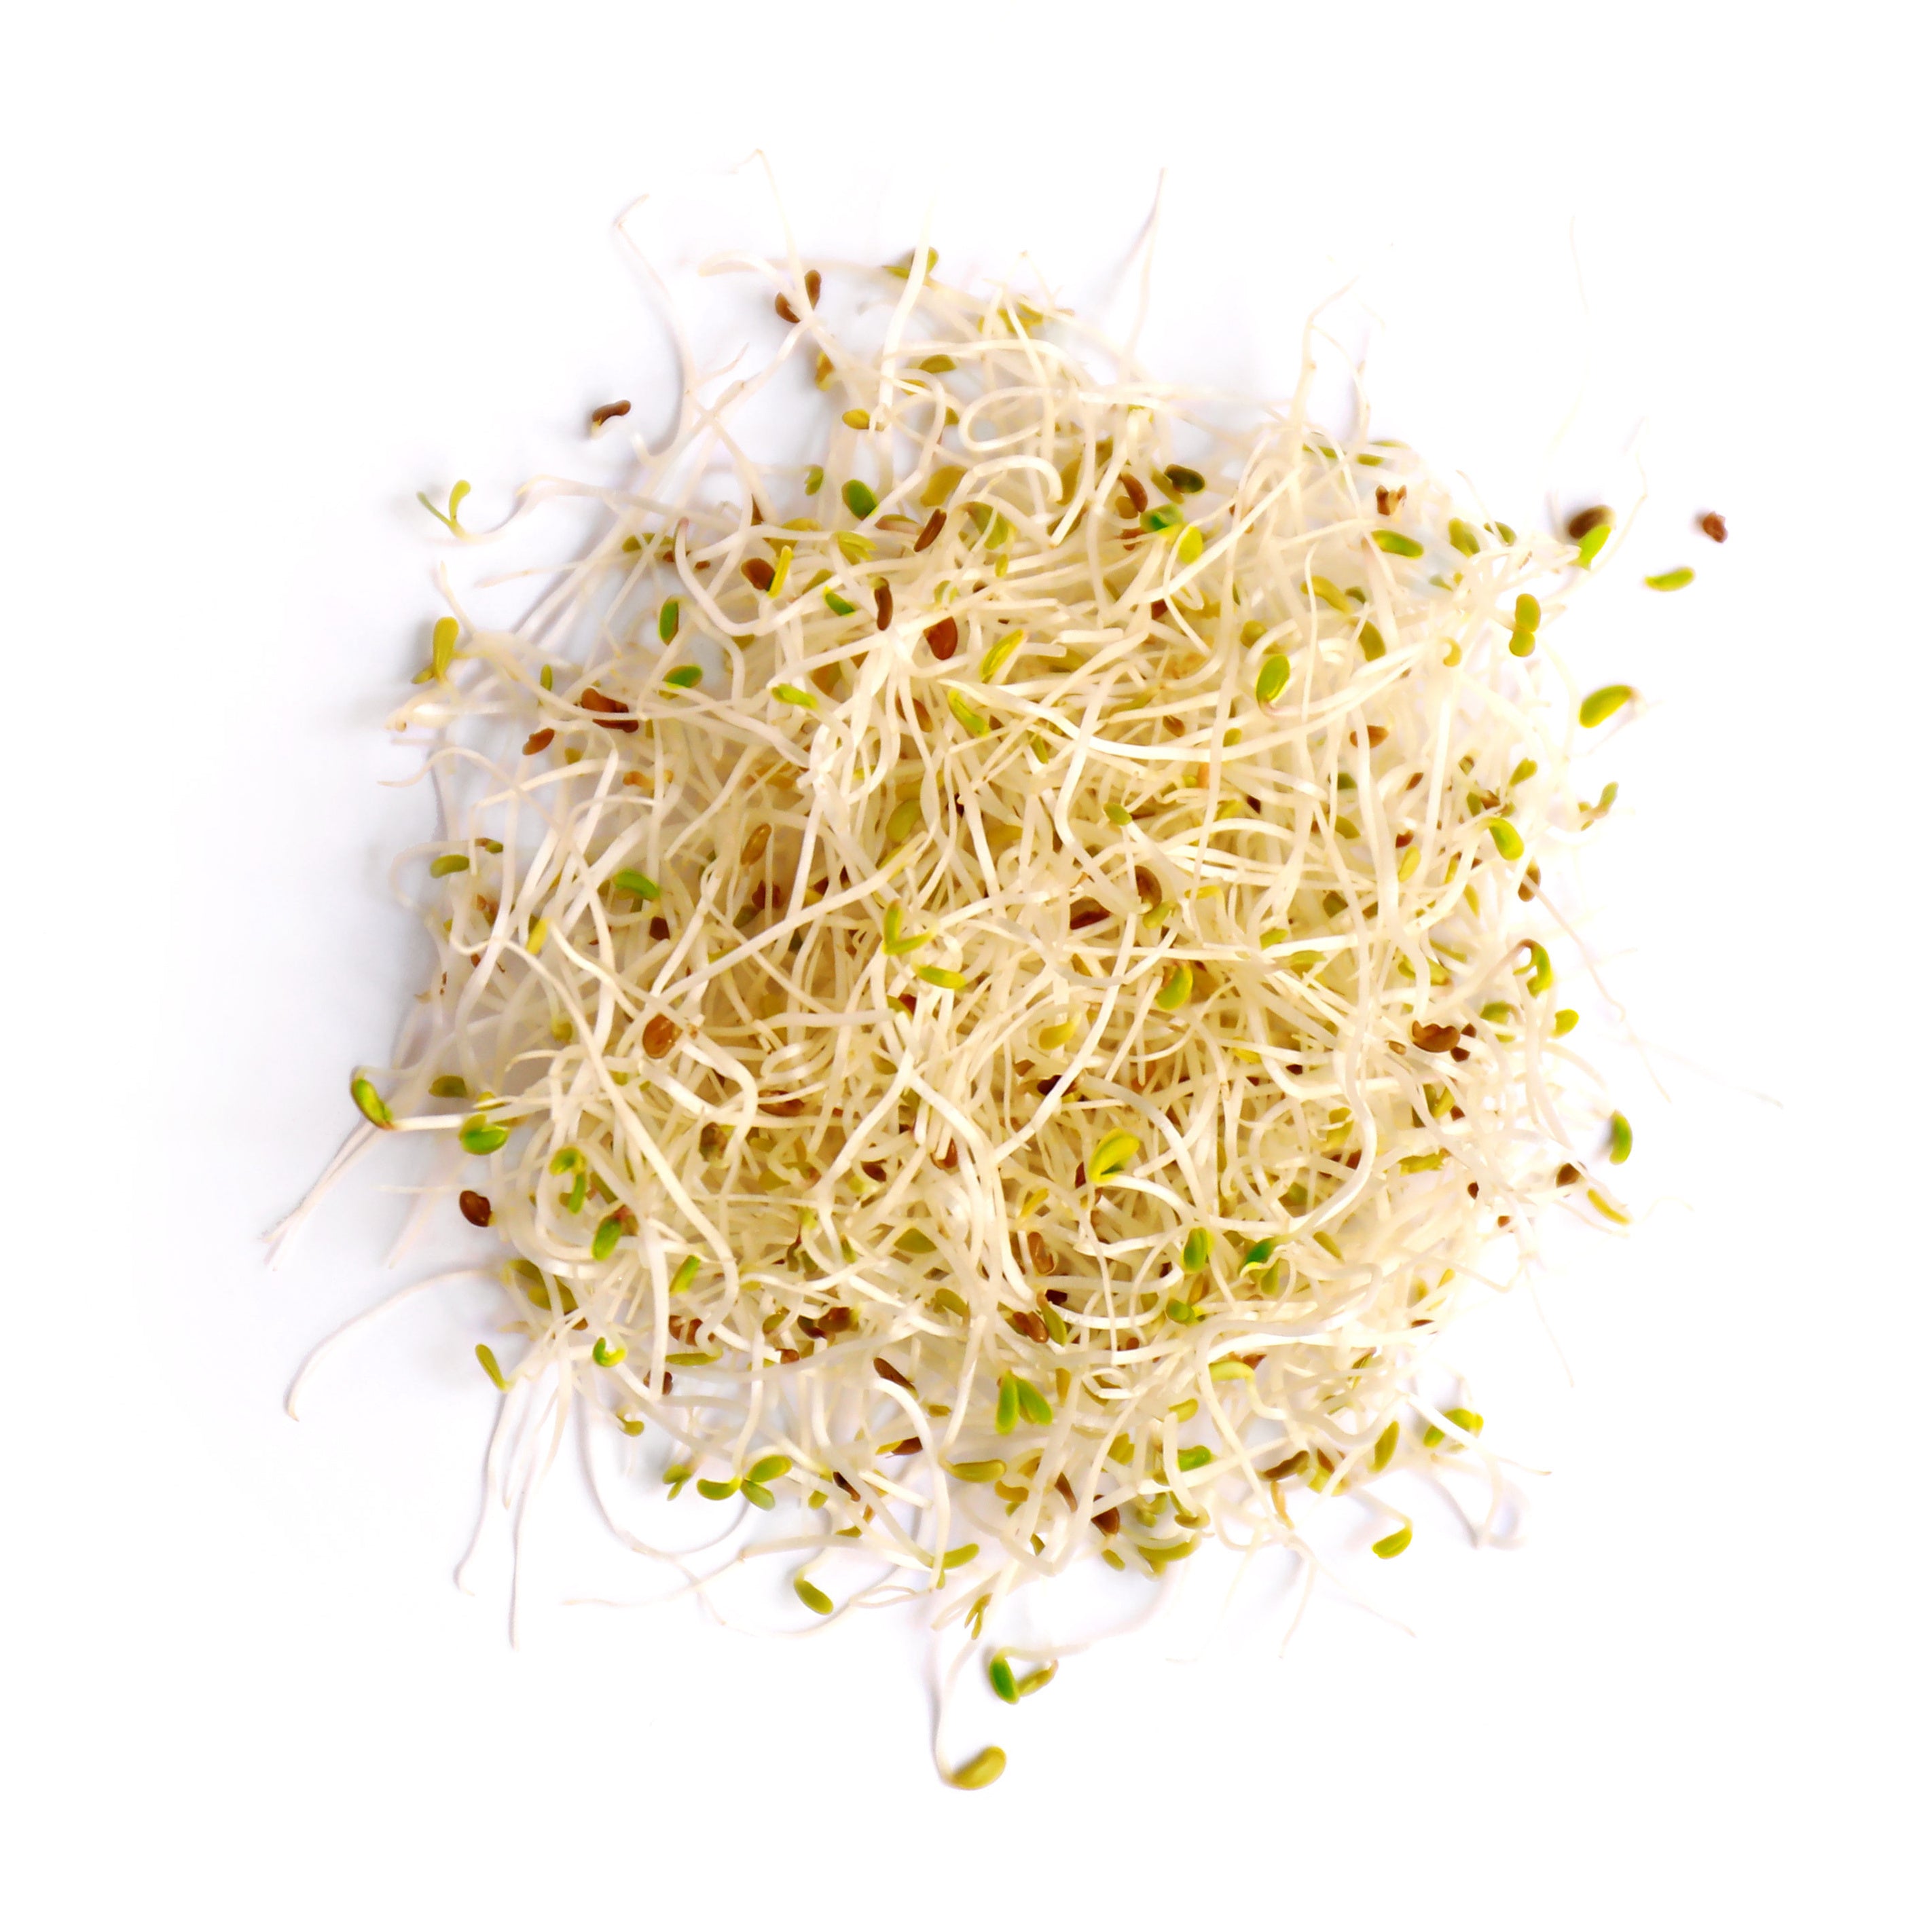 A close-up of broccoli sprouts